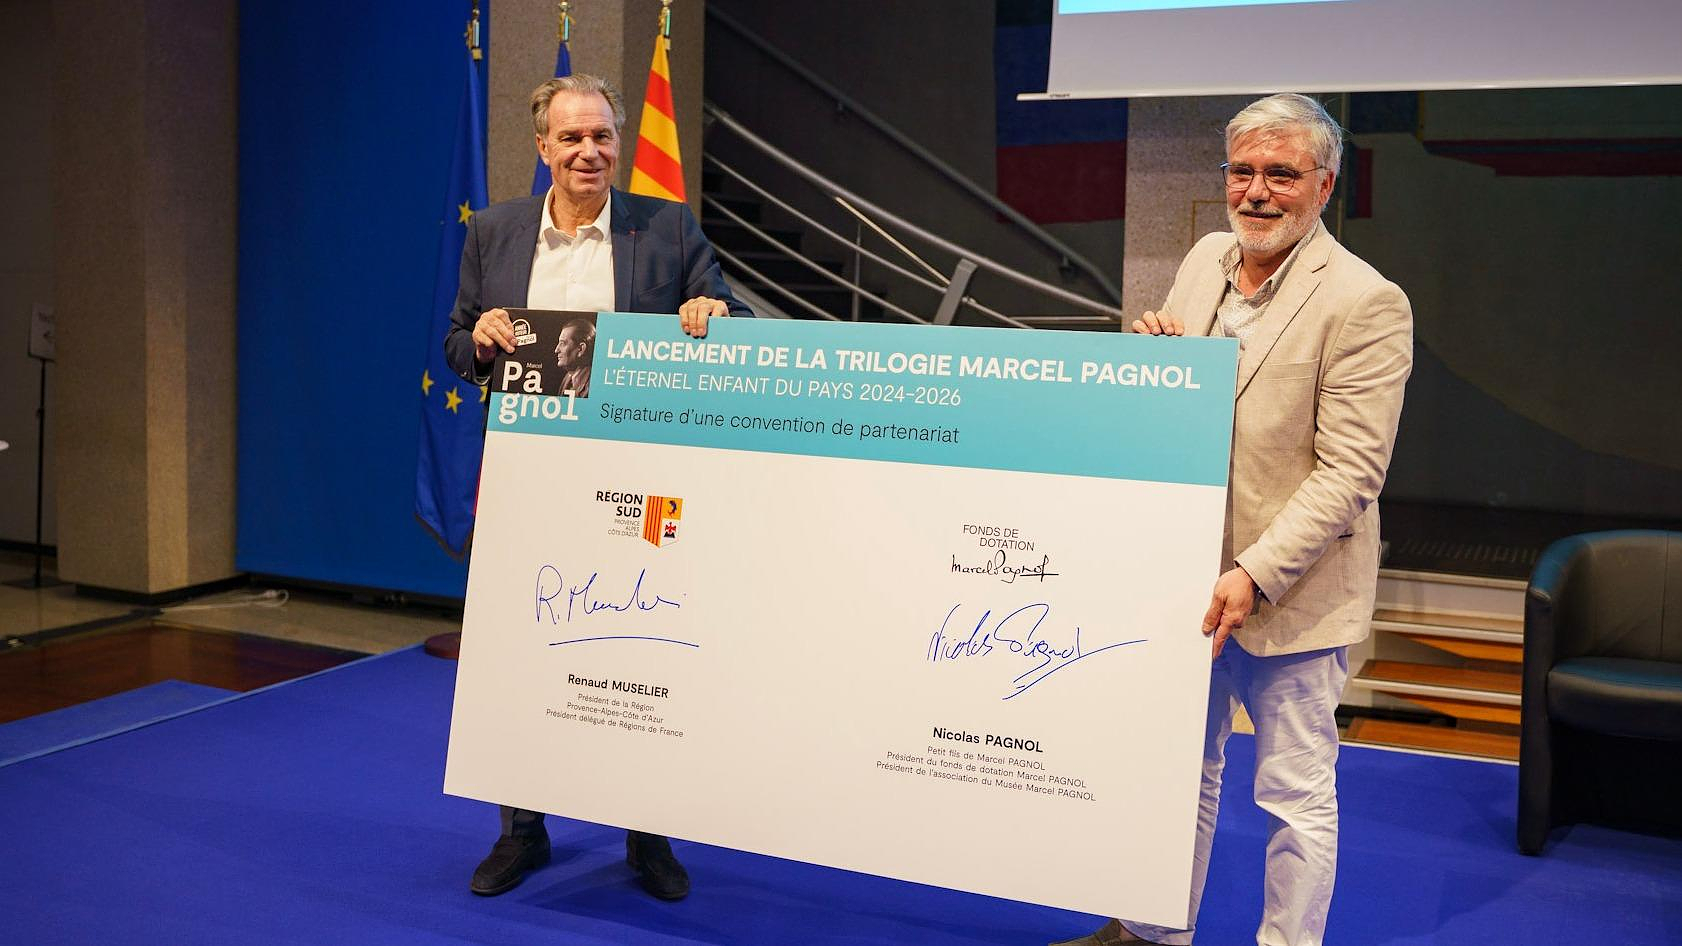 Provence-Alpes-Côte d’Azur releases several hundred thousand euros for the promotion of the work of Marcel Pagnol